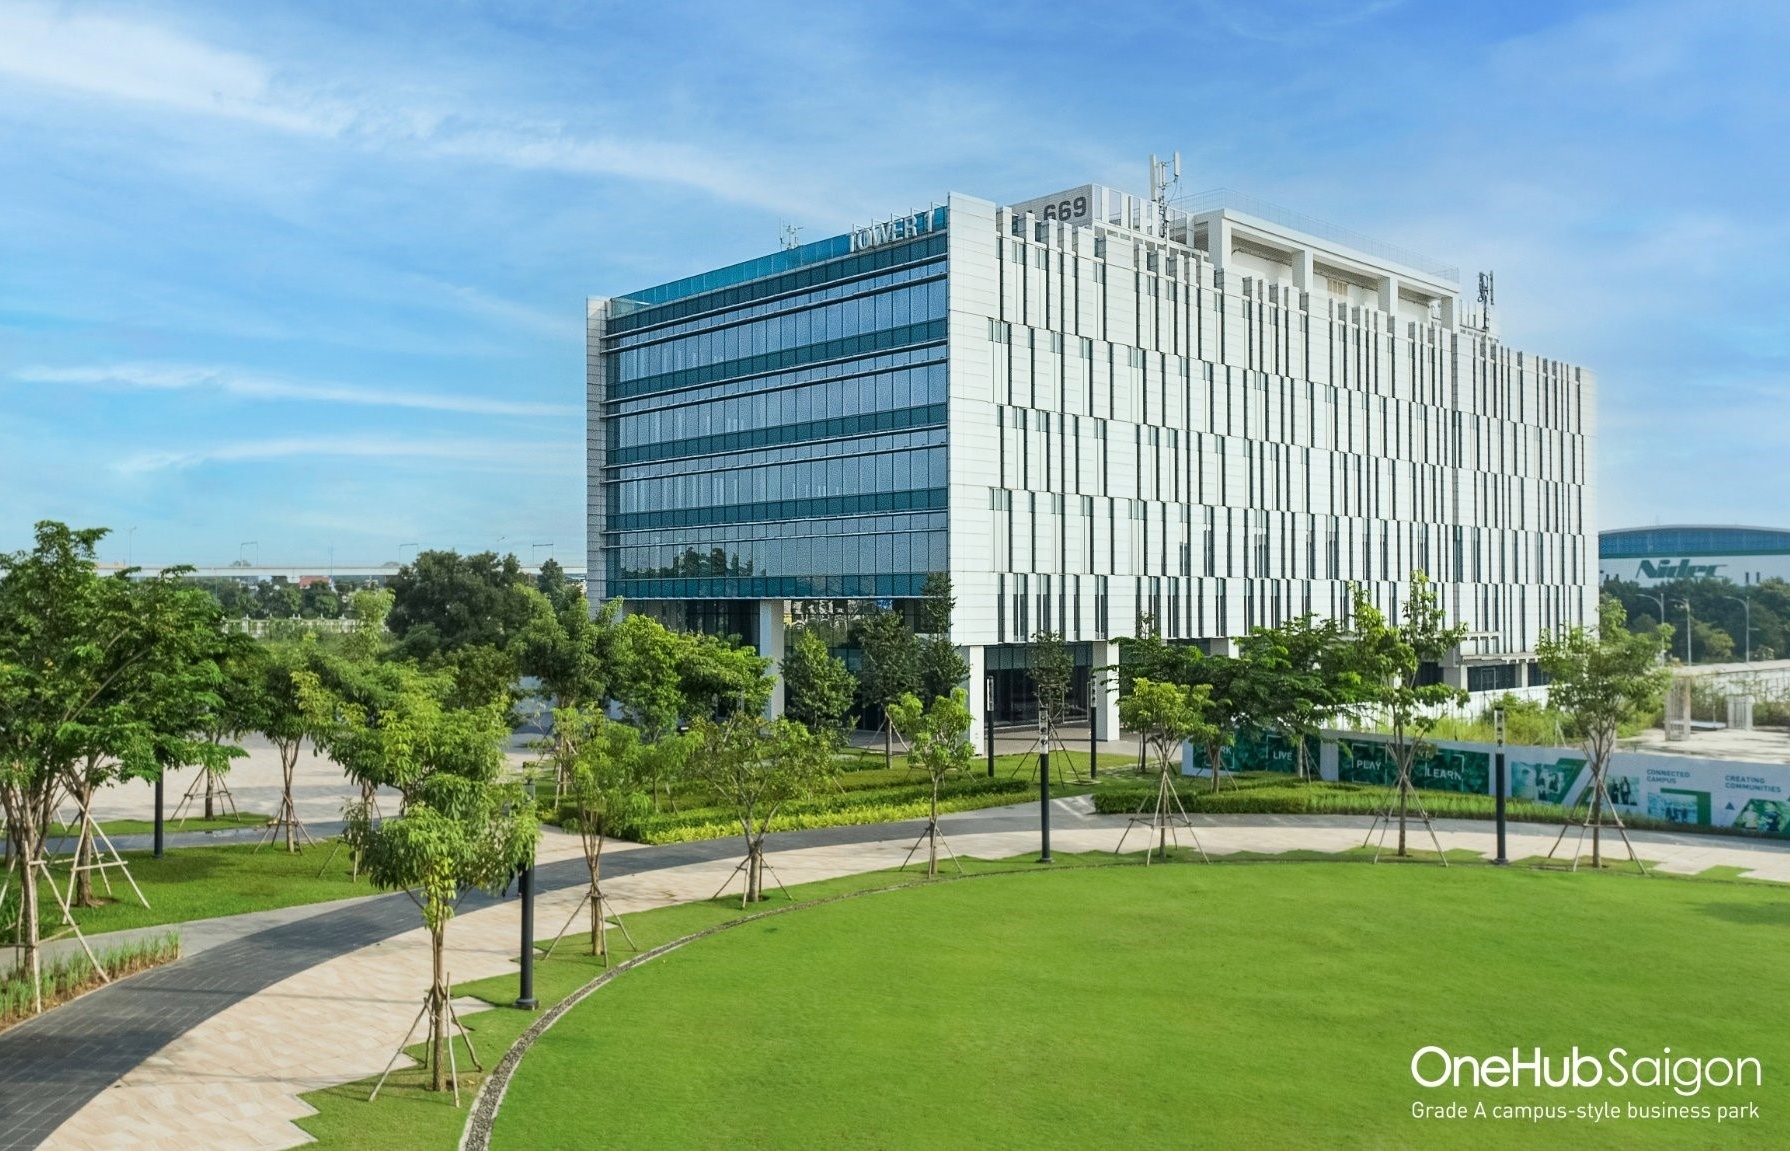 OneHub Saigon becomes ideal office destination for the new economy